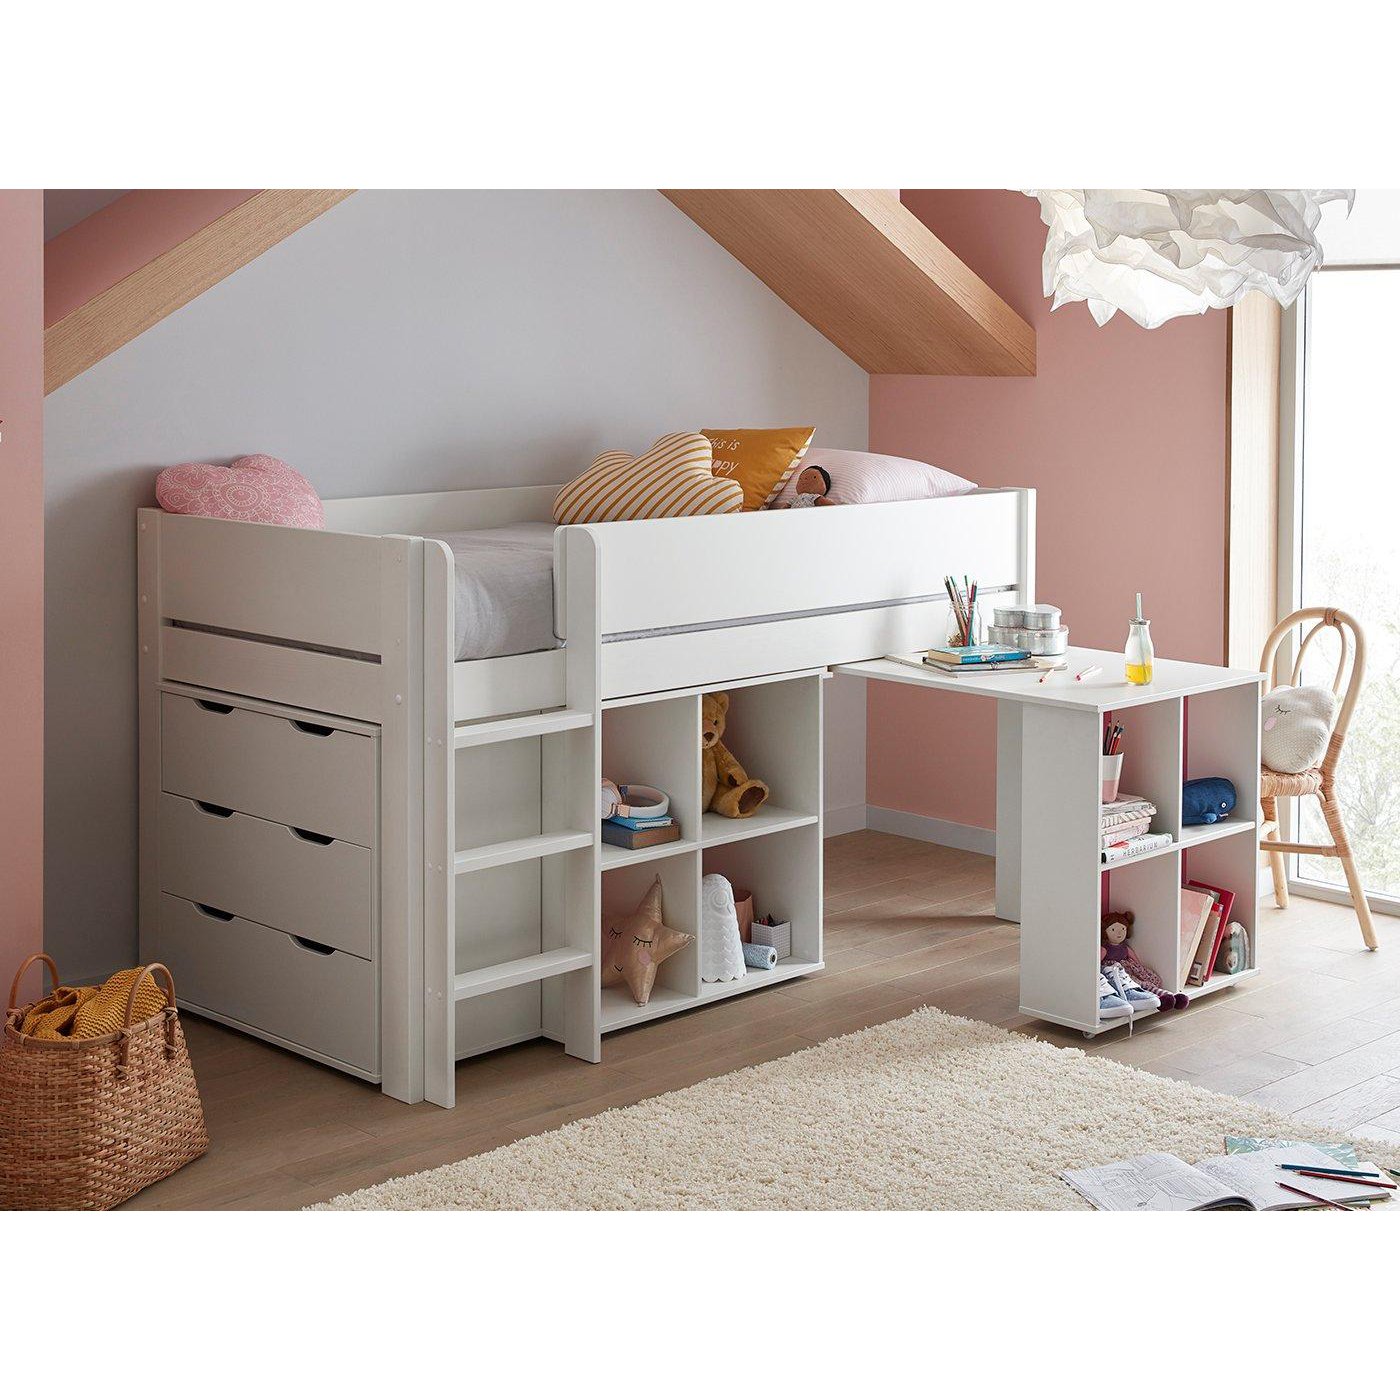 Sleeper Tinsley Dreams Mid Sleeper bed with drawers pull out desk and shelving  